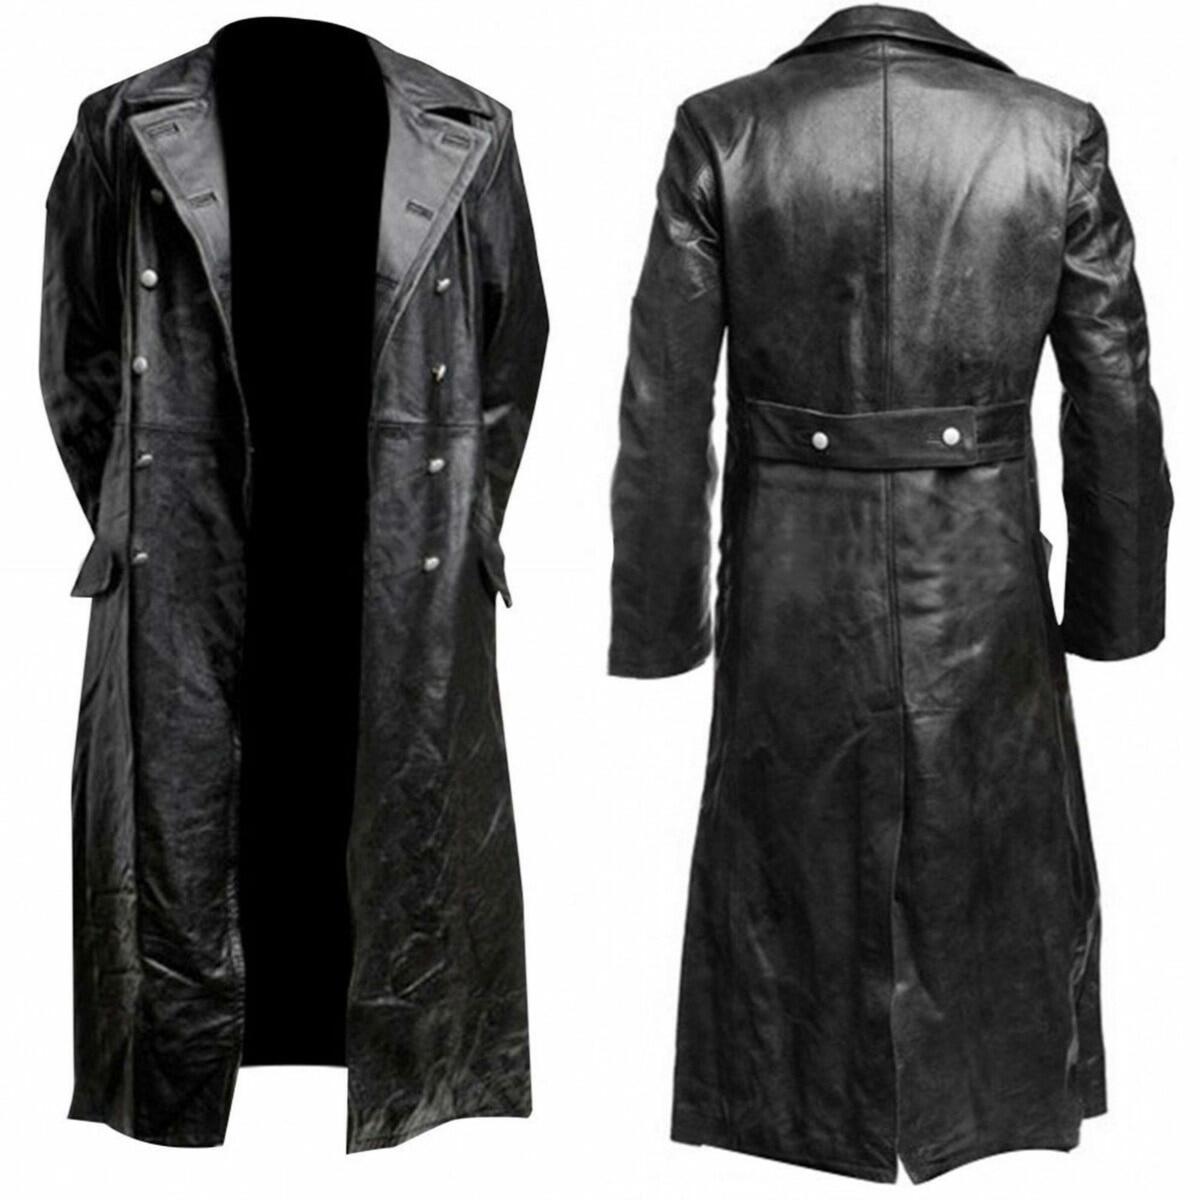 MEN s GERMAN CLASSIC WW2 MILITARY UNIFORM OFFICER BLACK REAL LEATHER